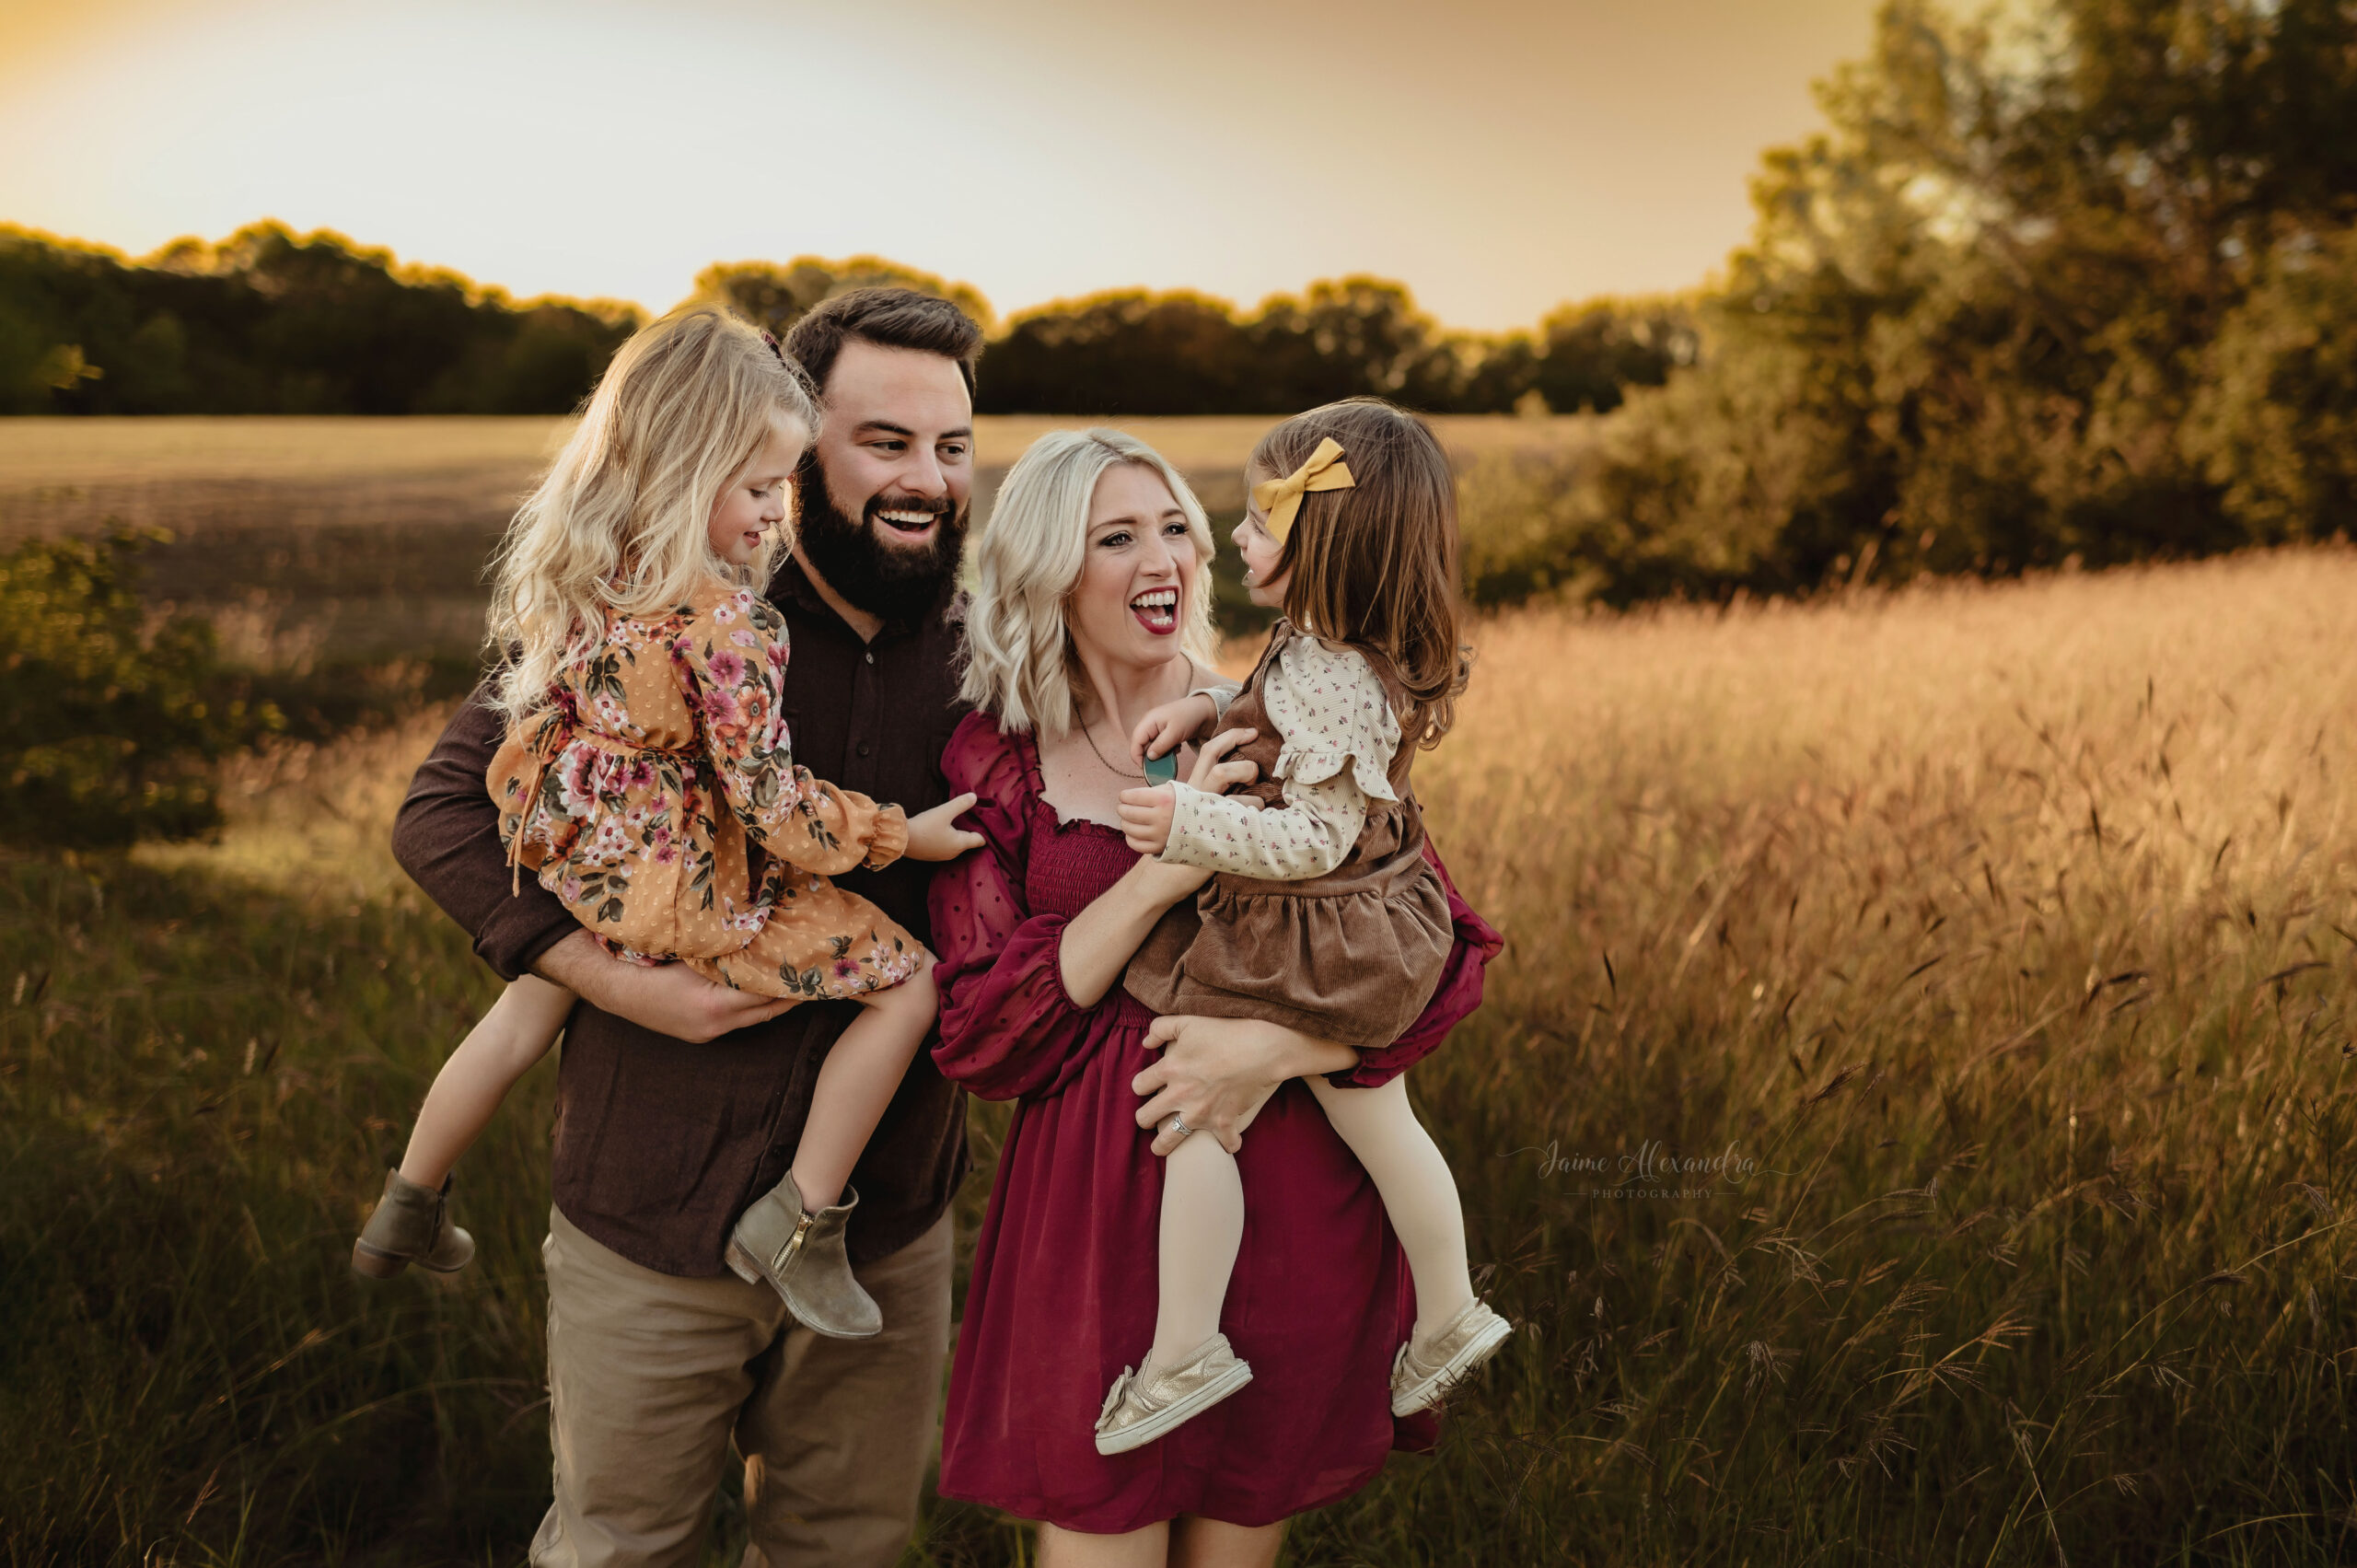 Fort Worth family photographer